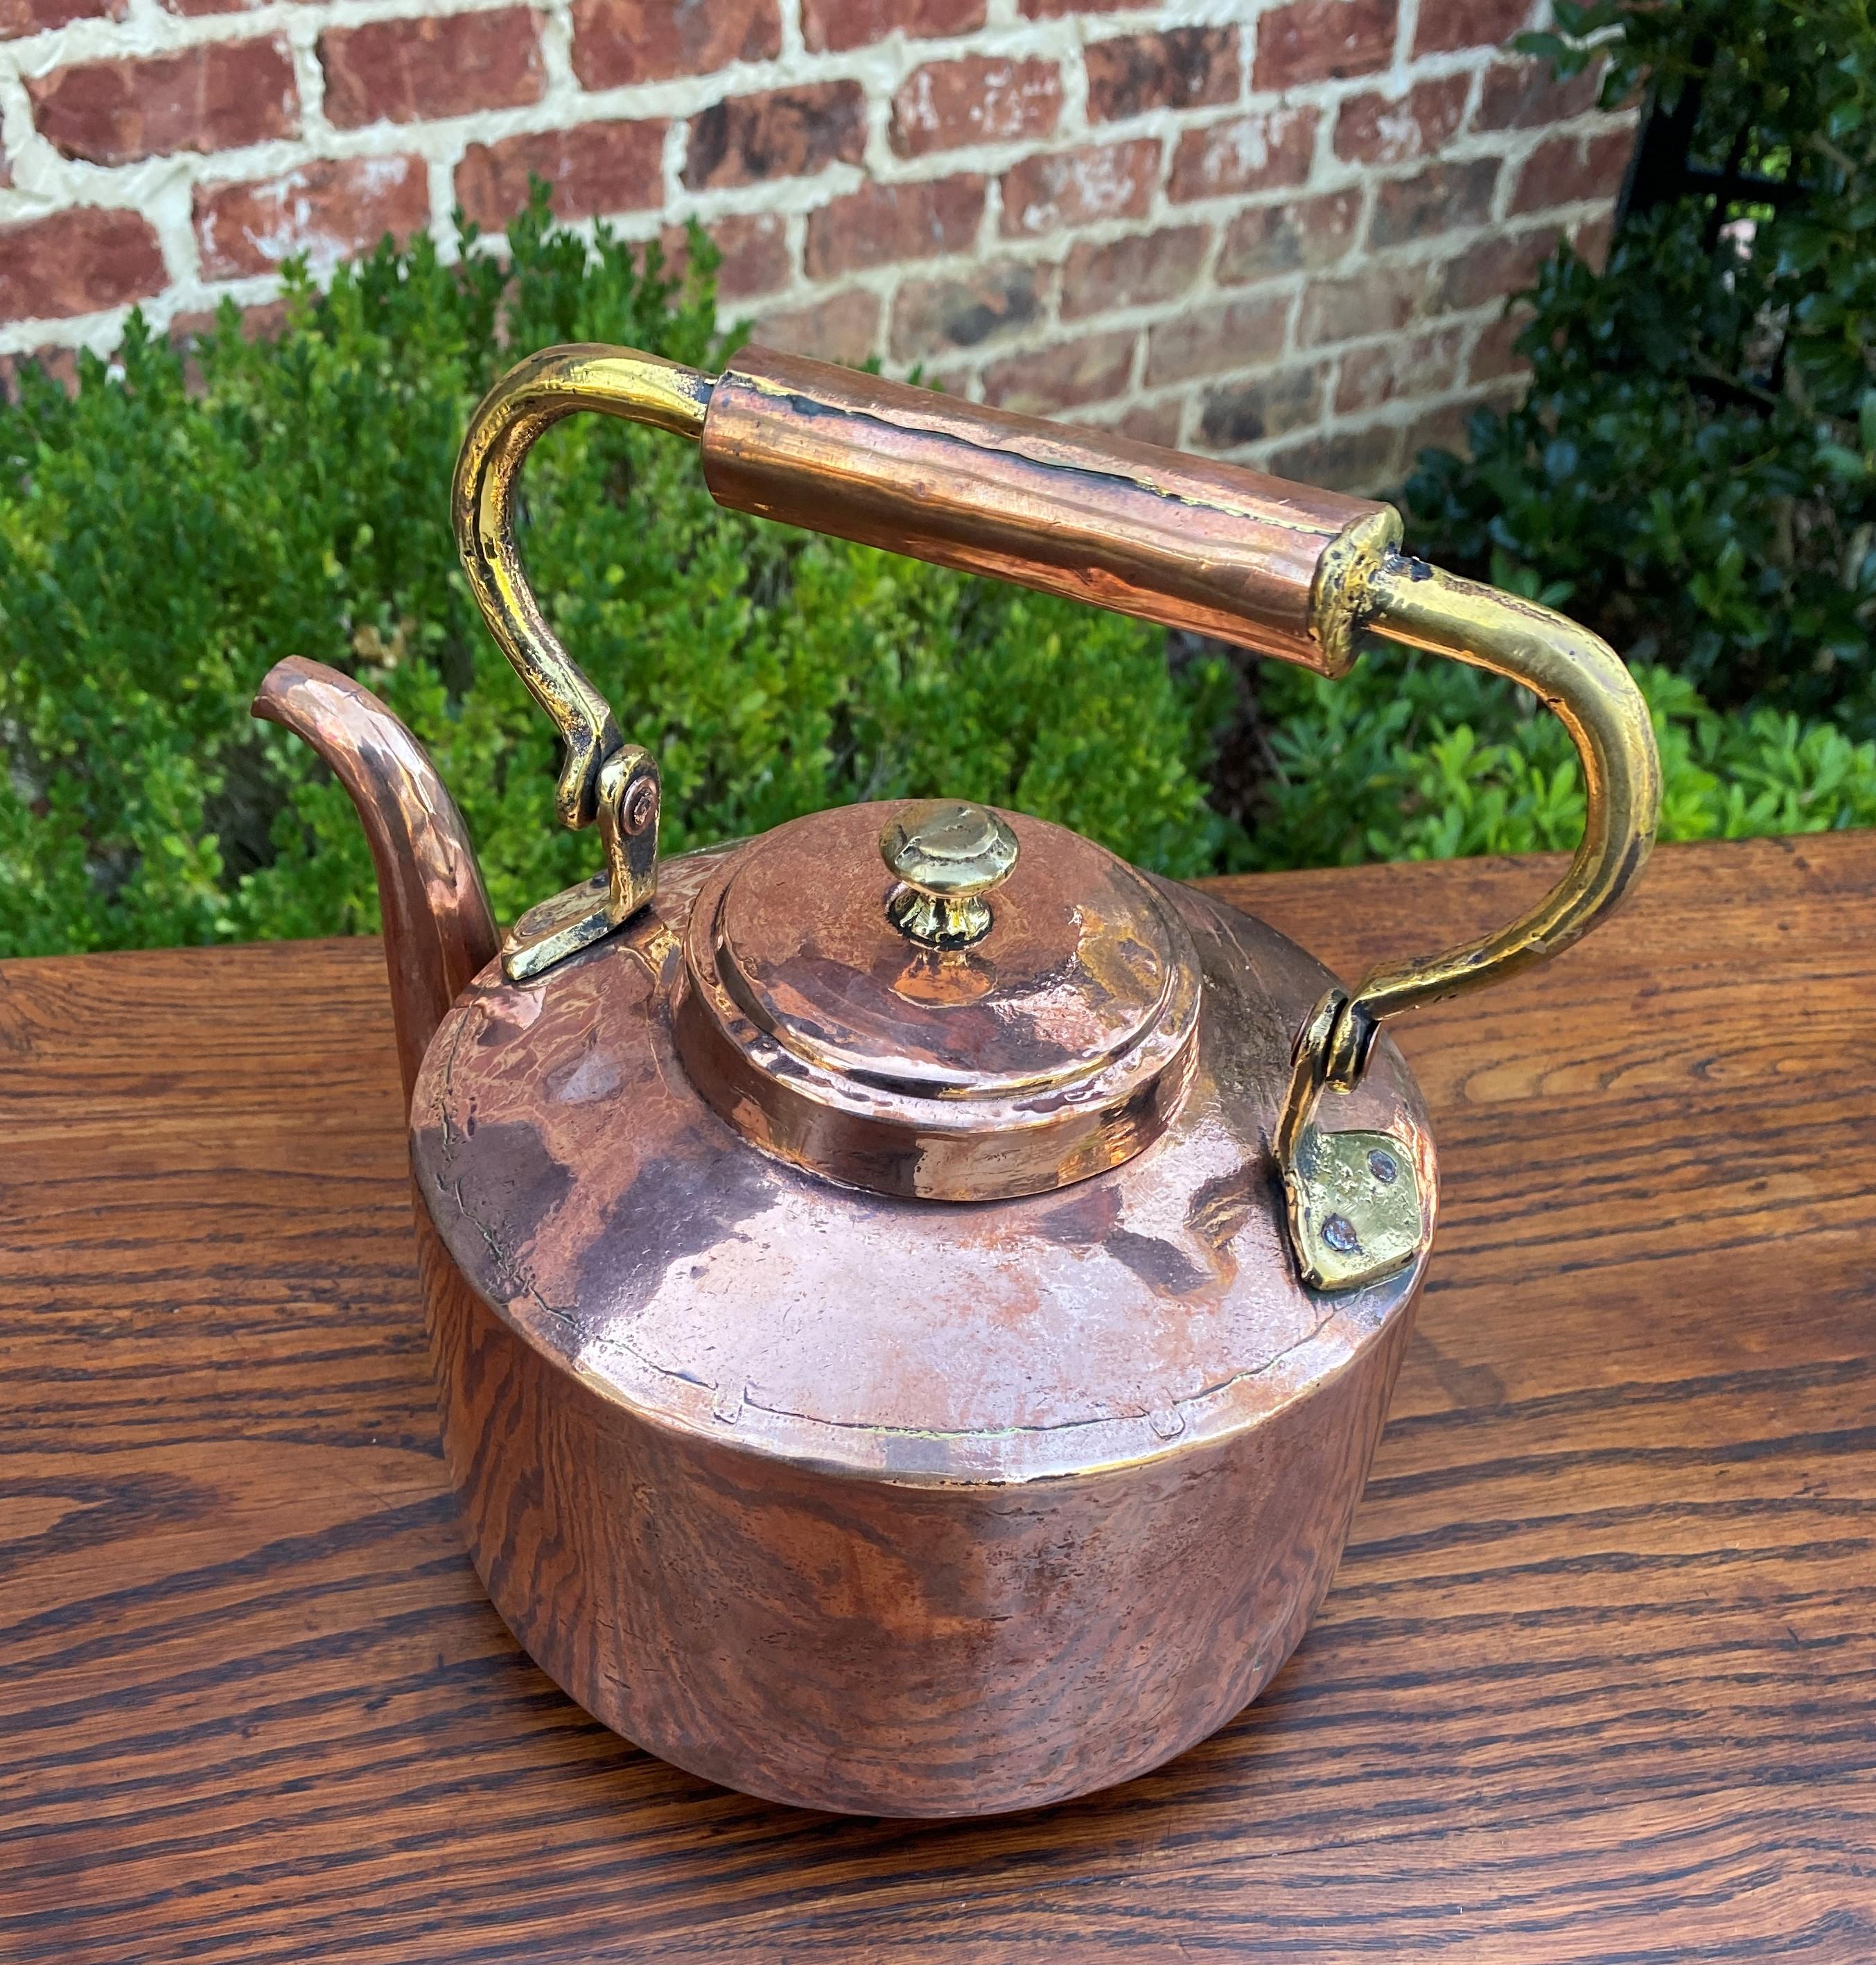 British Colonial Antique English Copper & Brass Kettle Hand Seamed Tea Water Kettle, c. 1900